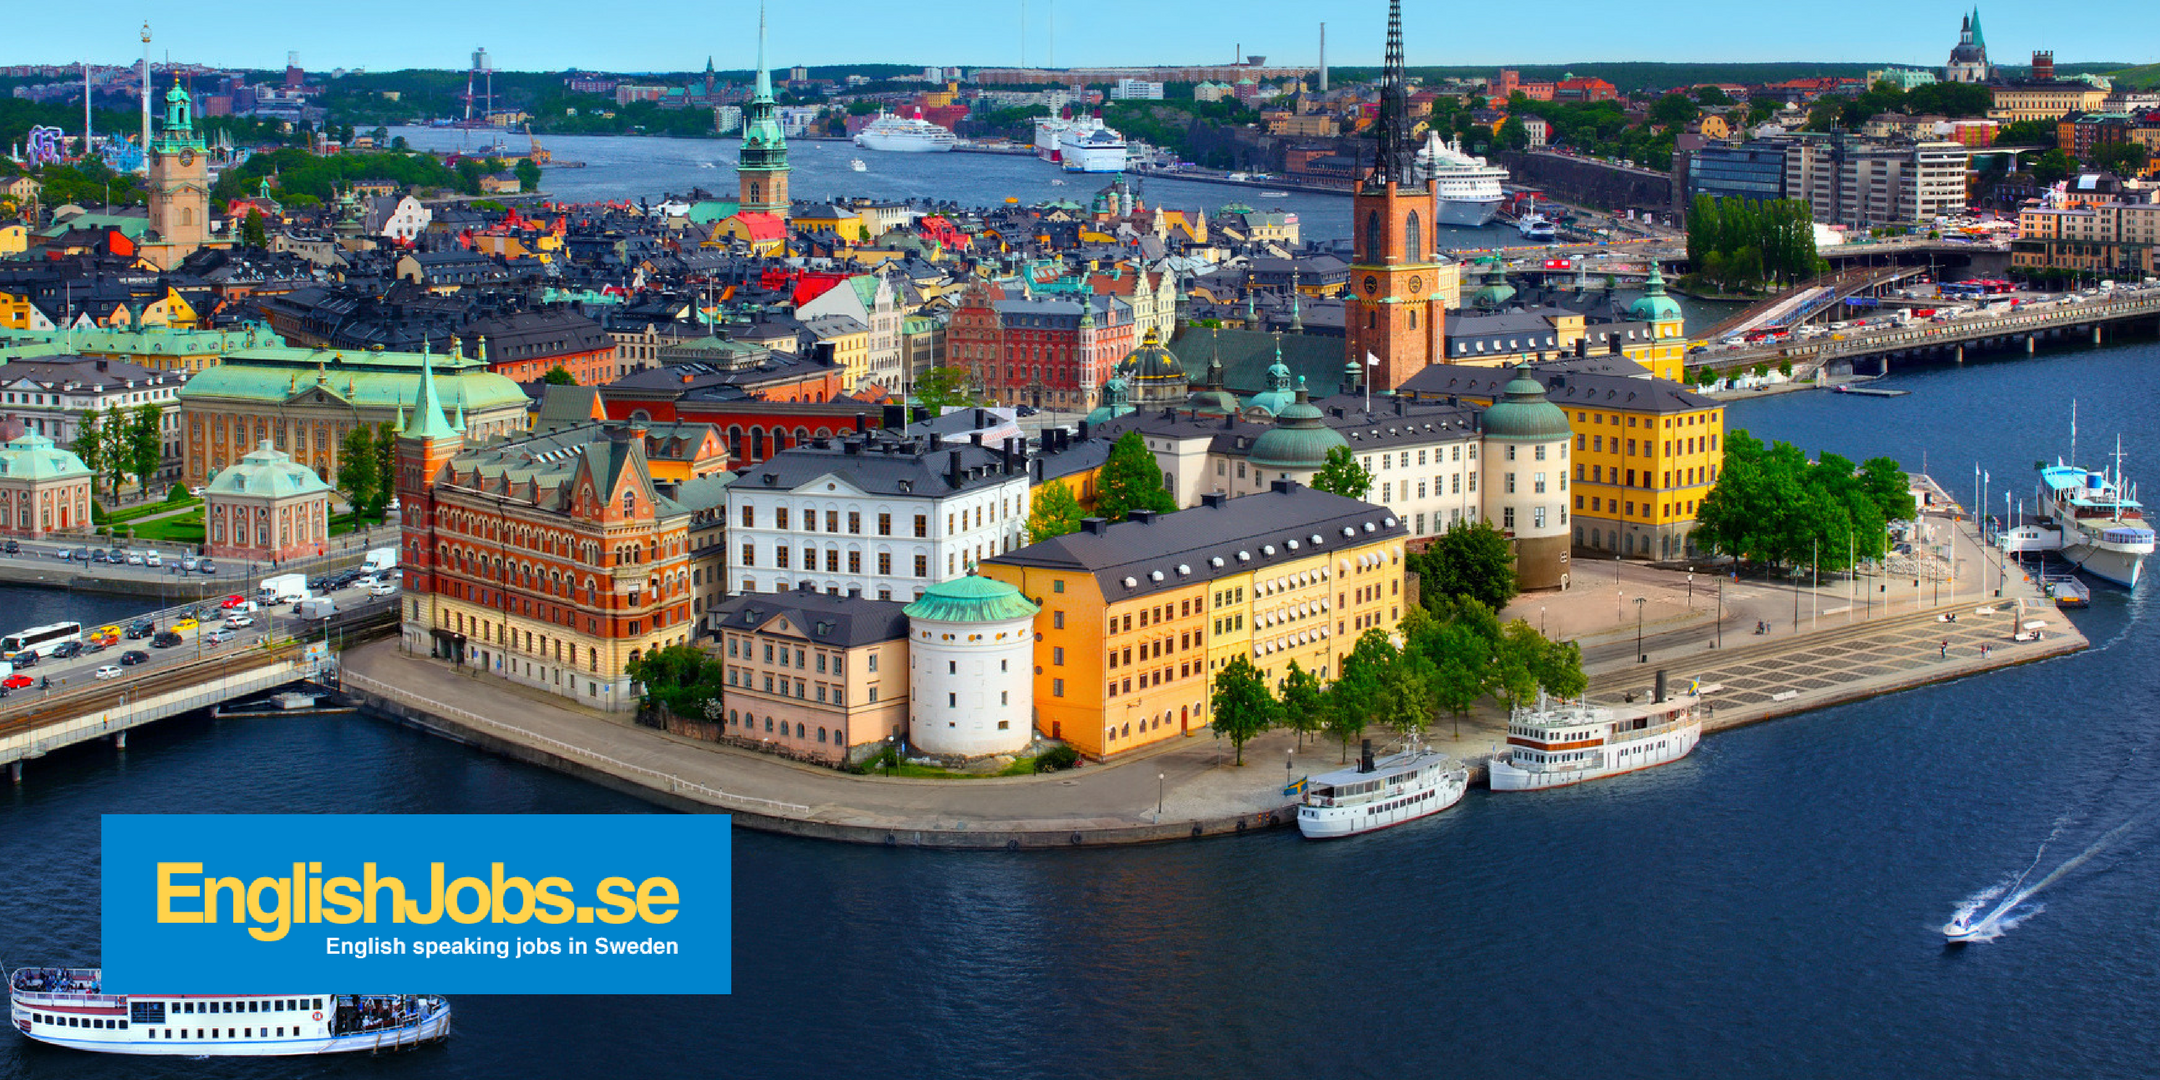 Work in Europe (Sweden, Denmark, Germany) - Your job search from San Antonio to Stockholm